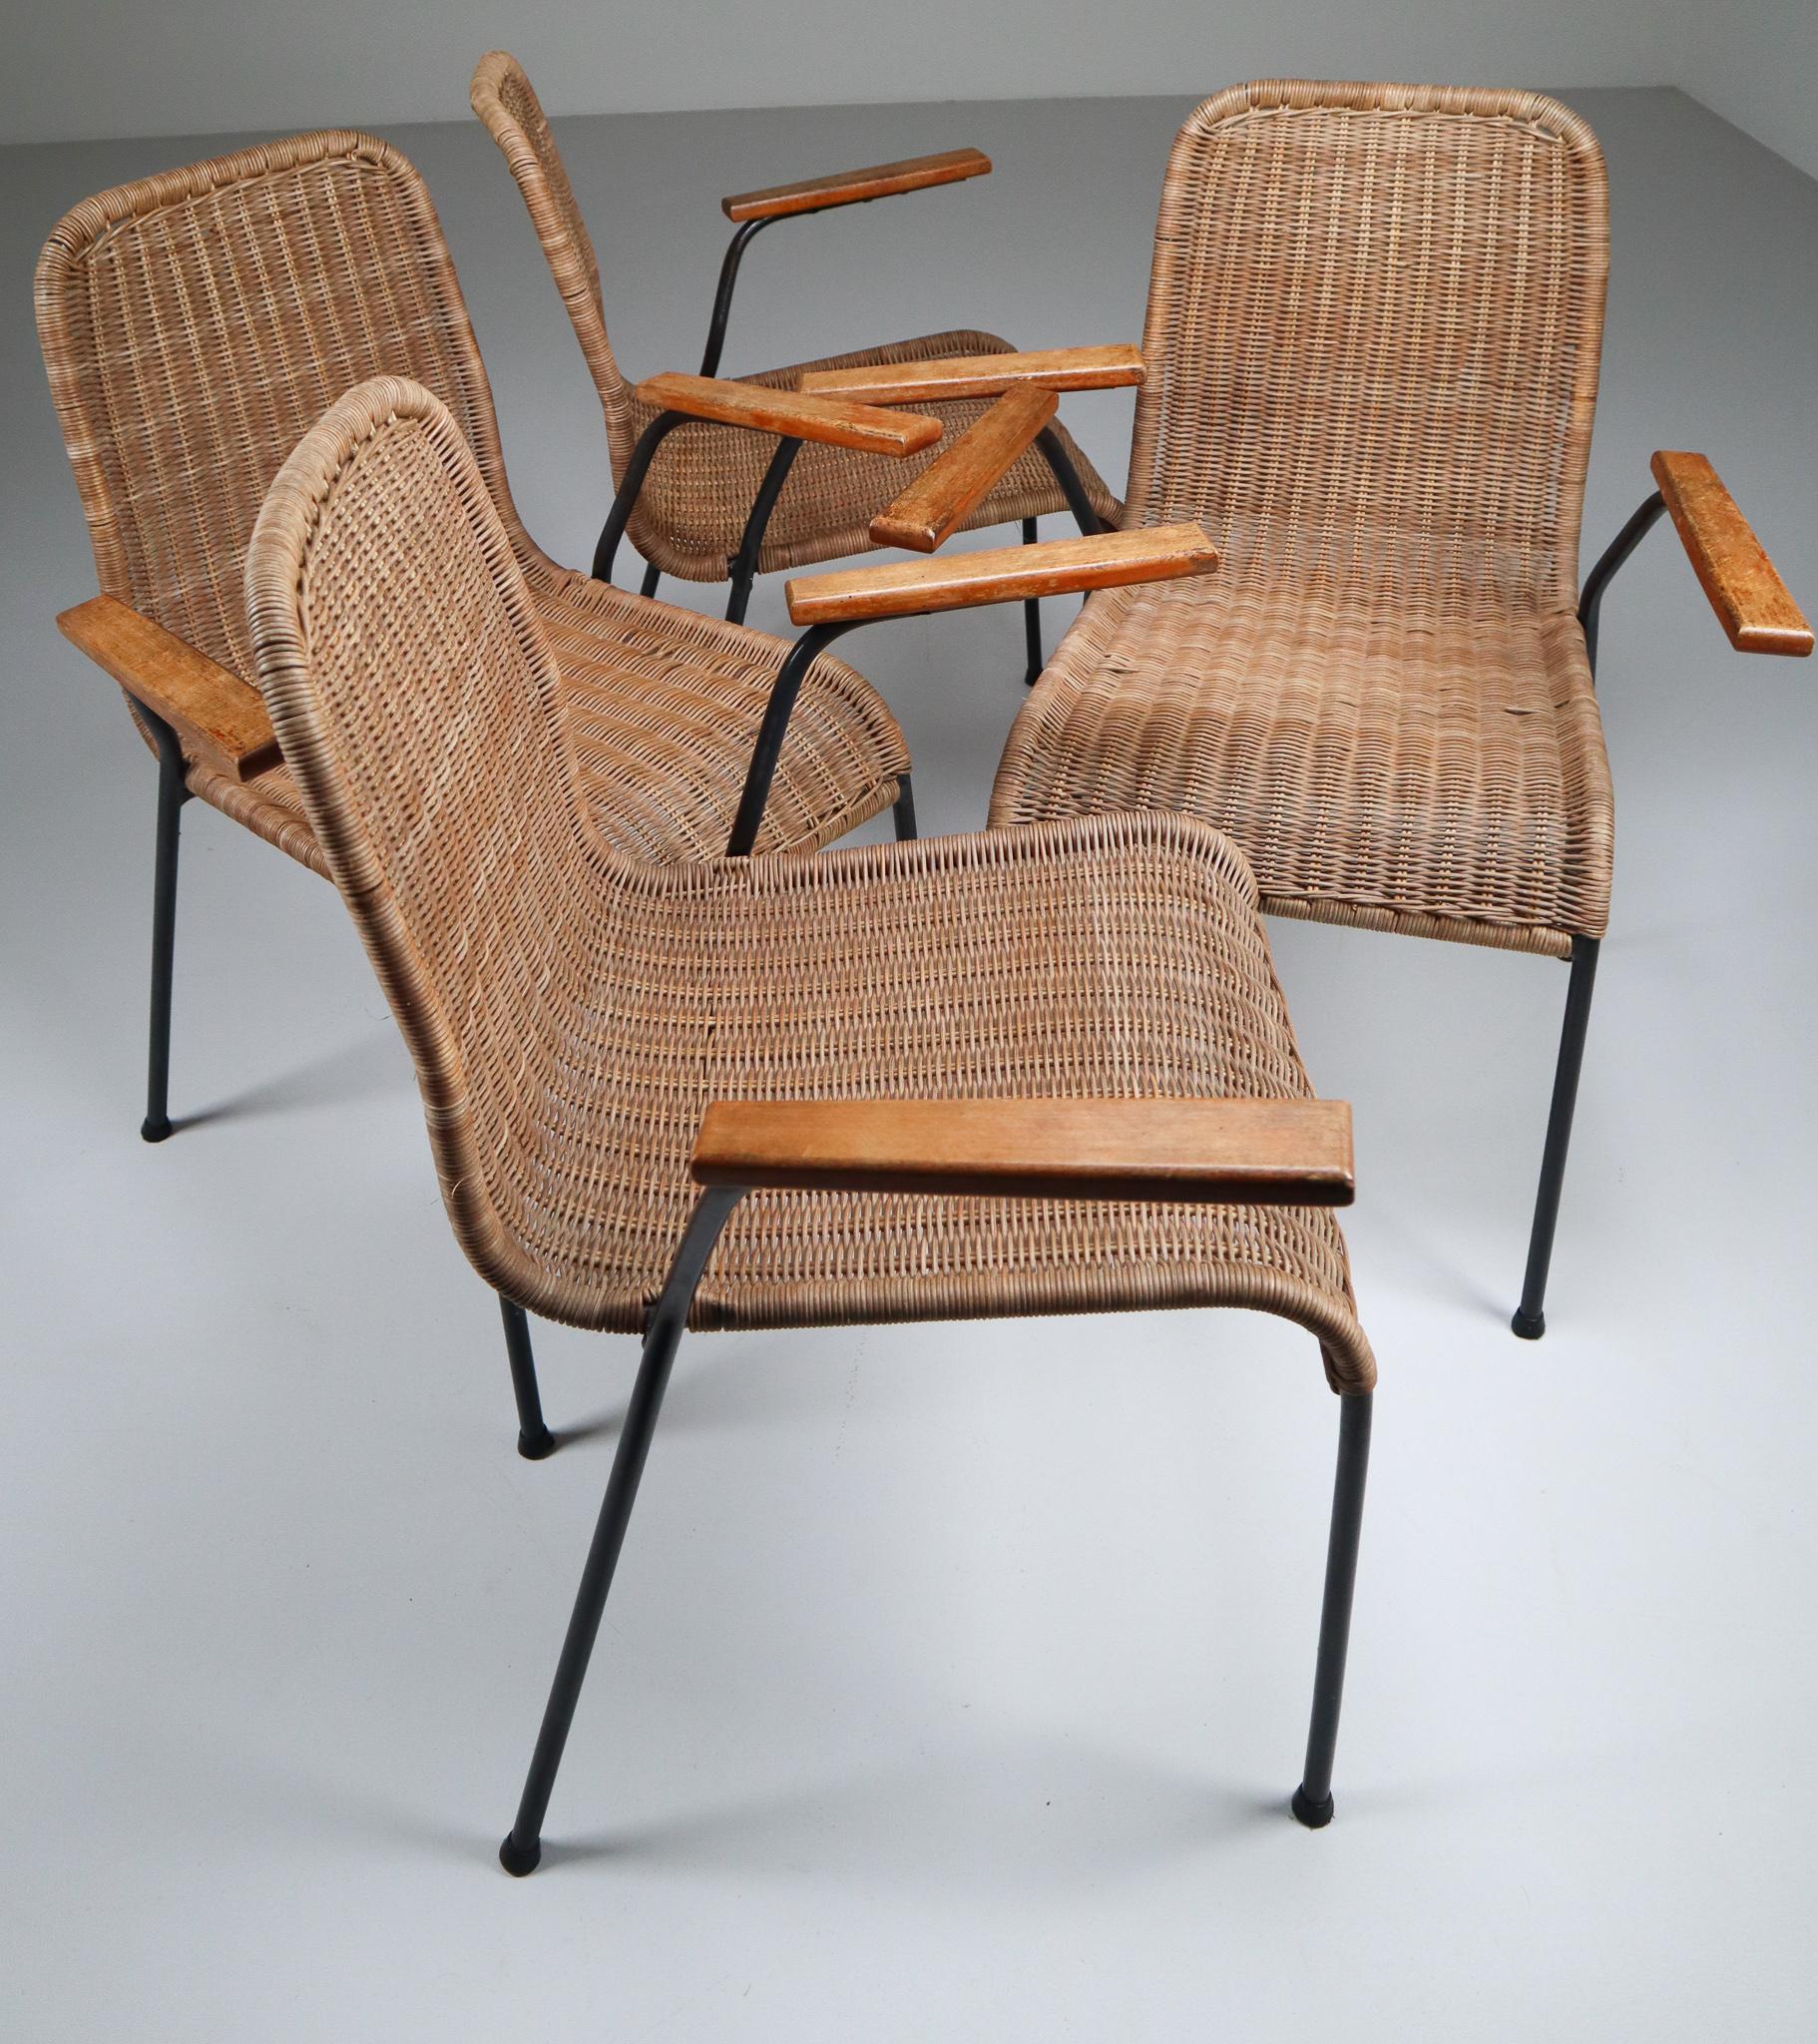 Dutch Patinated Metal Framed Armchairs with Woven Wicker Seat, The Netherlands, 1950